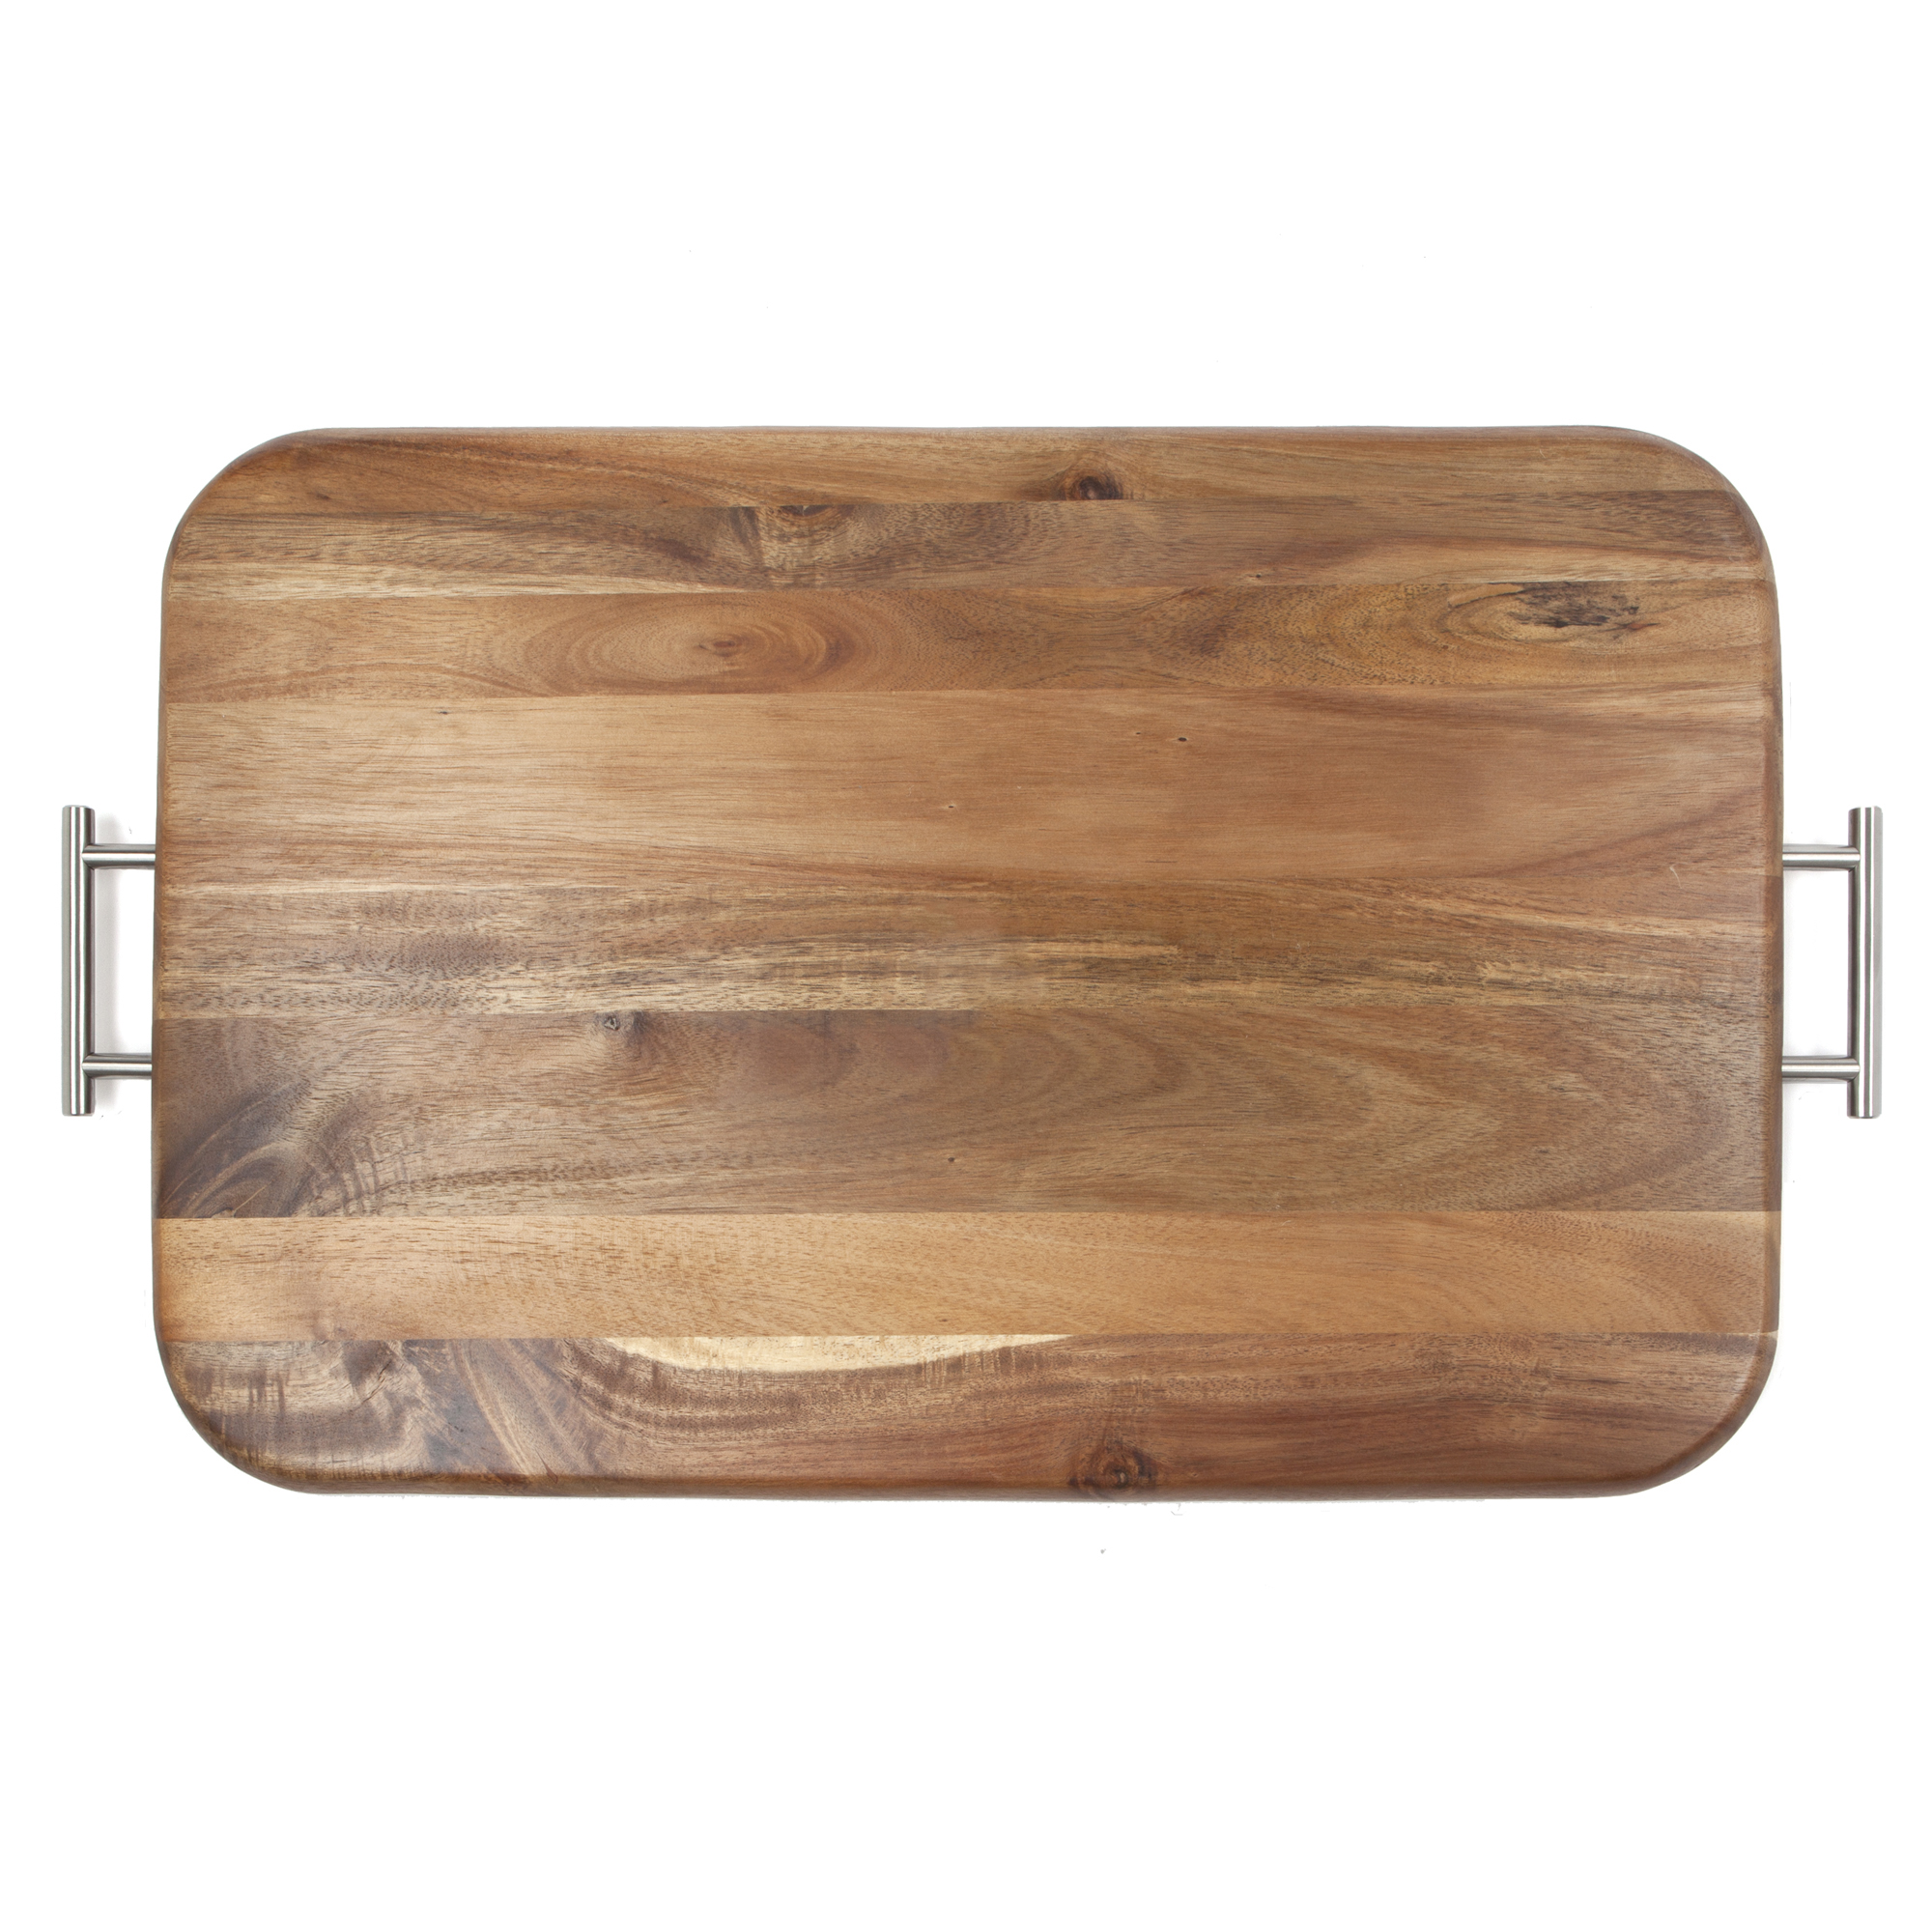 Better Homes & Gardens Acacia Wood Serving Tray with Silver Handles - image 4 of 4